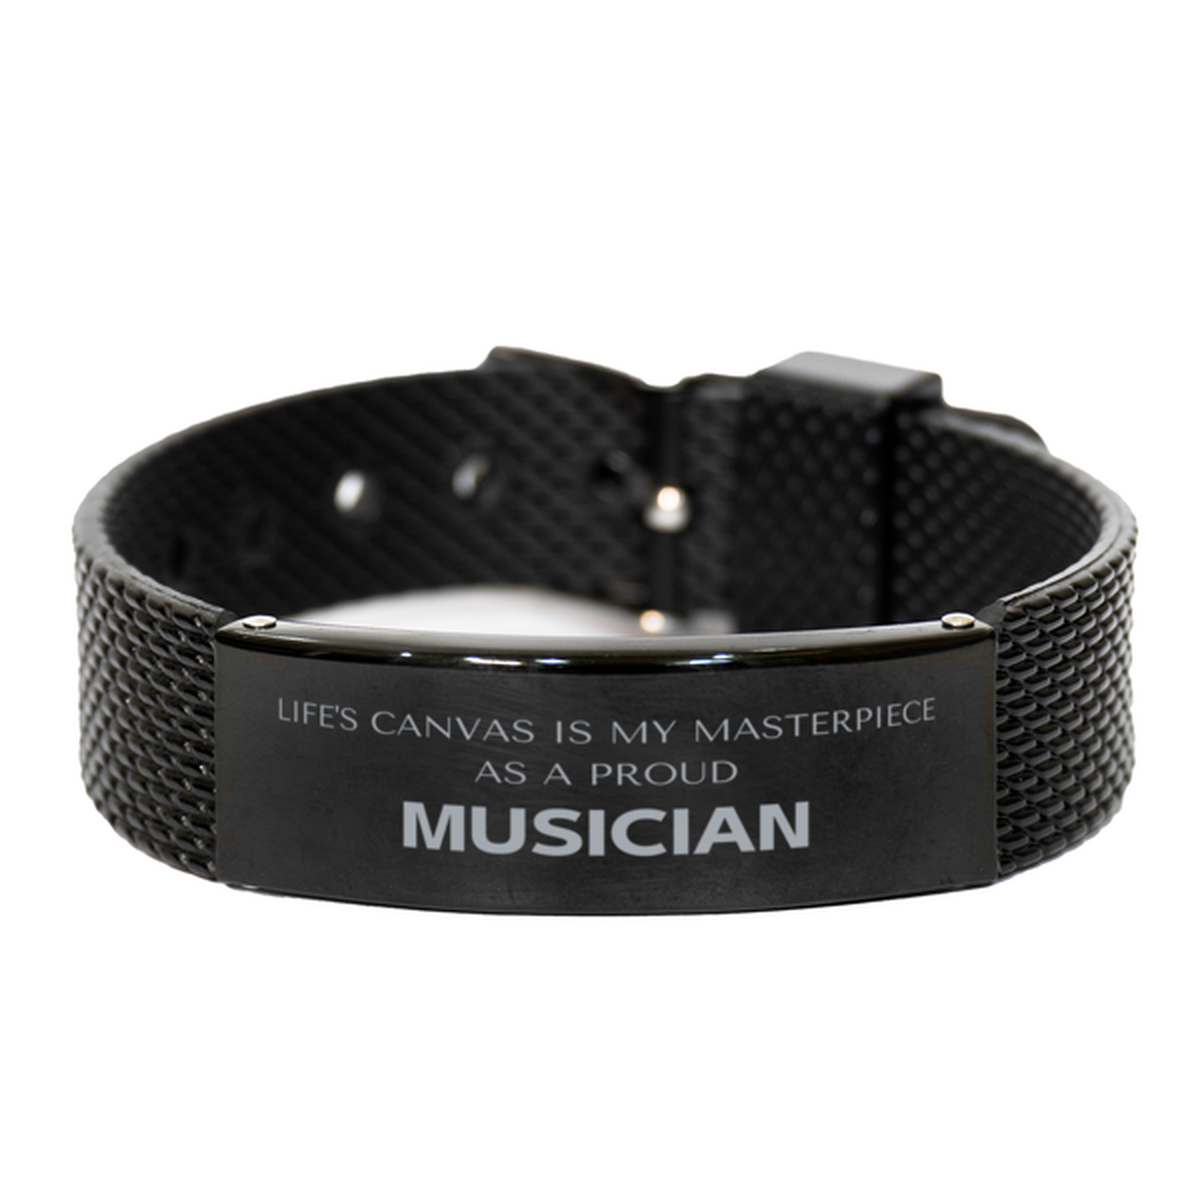 Proud Musician Gifts, Life's canvas is my masterpiece, Epic Birthday Christmas Unique Black Shark Mesh Bracelet For Musician, Coworkers, Men, Women, Friends